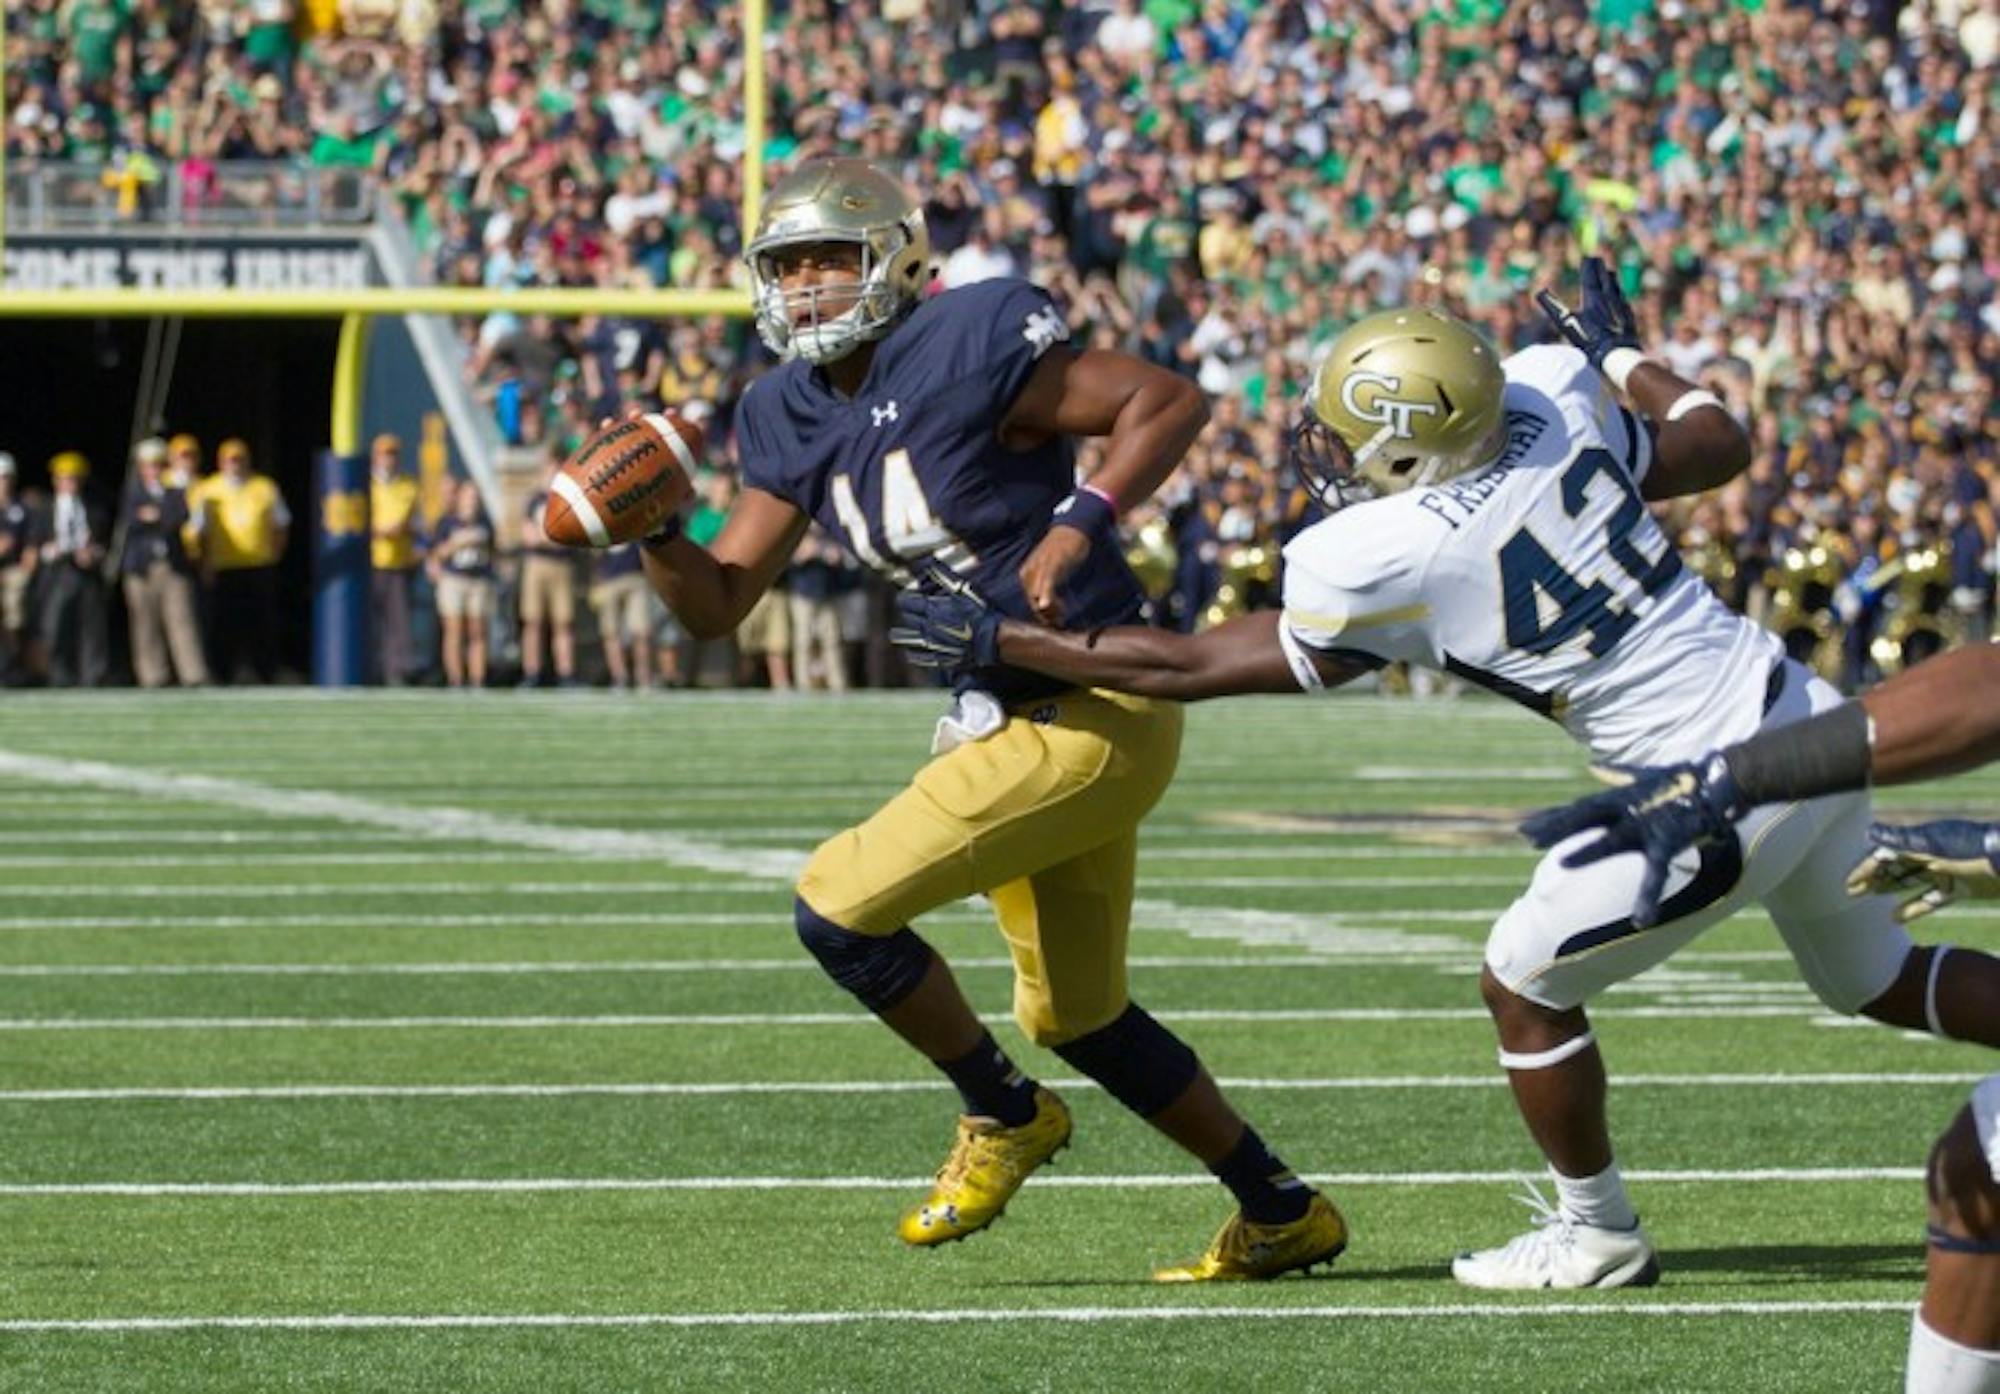 Sophomore quarterback DeShone Kizer took the reins from Malik Zaire in his first start for the Irish, a 30-22 victory over Georgia Tech.